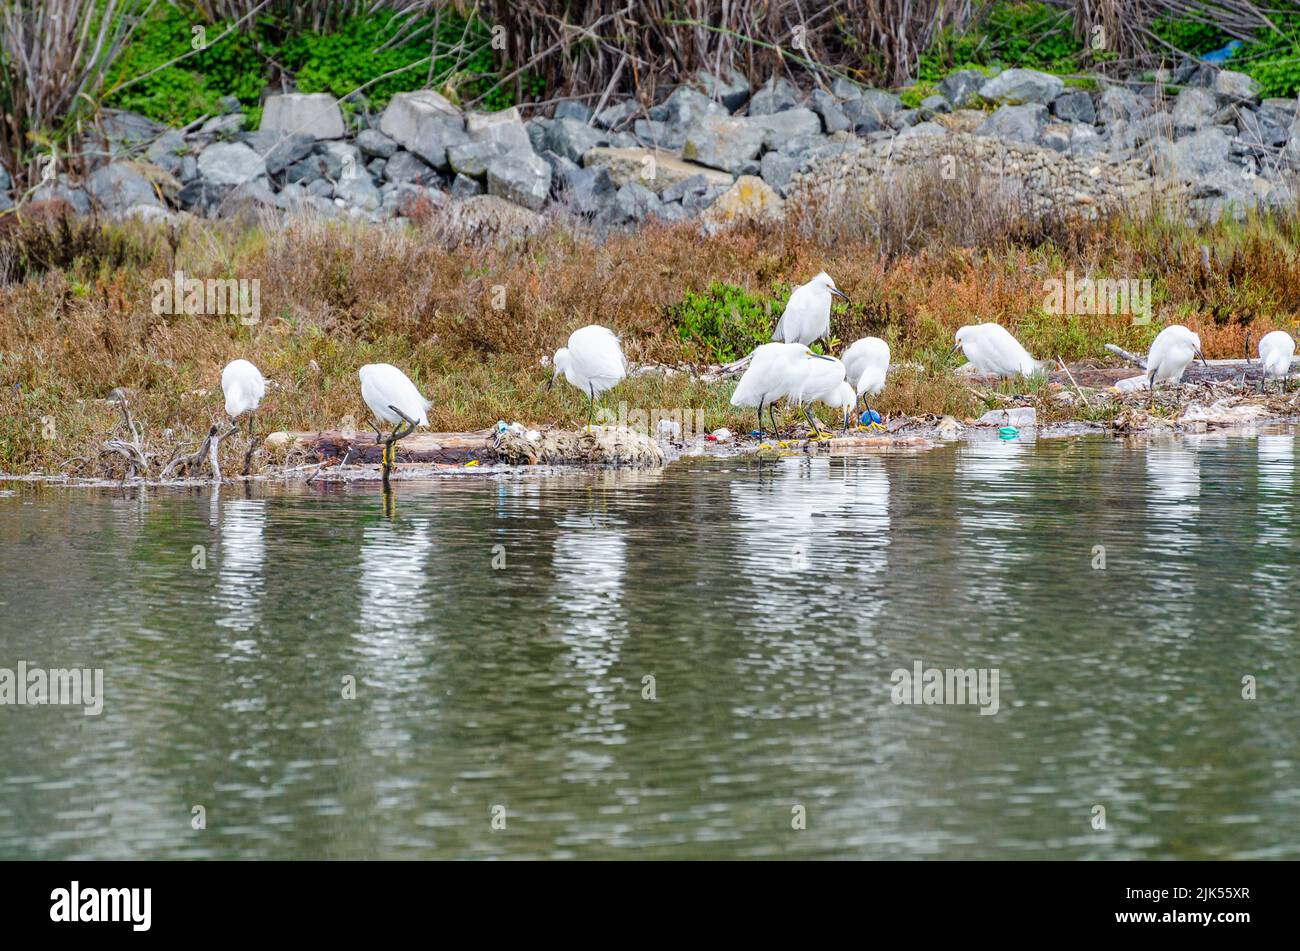 Snowy Egrets forage amongst washed up garbage in the side of the San Francisco Bay in San Leandro California USA Stock Photo